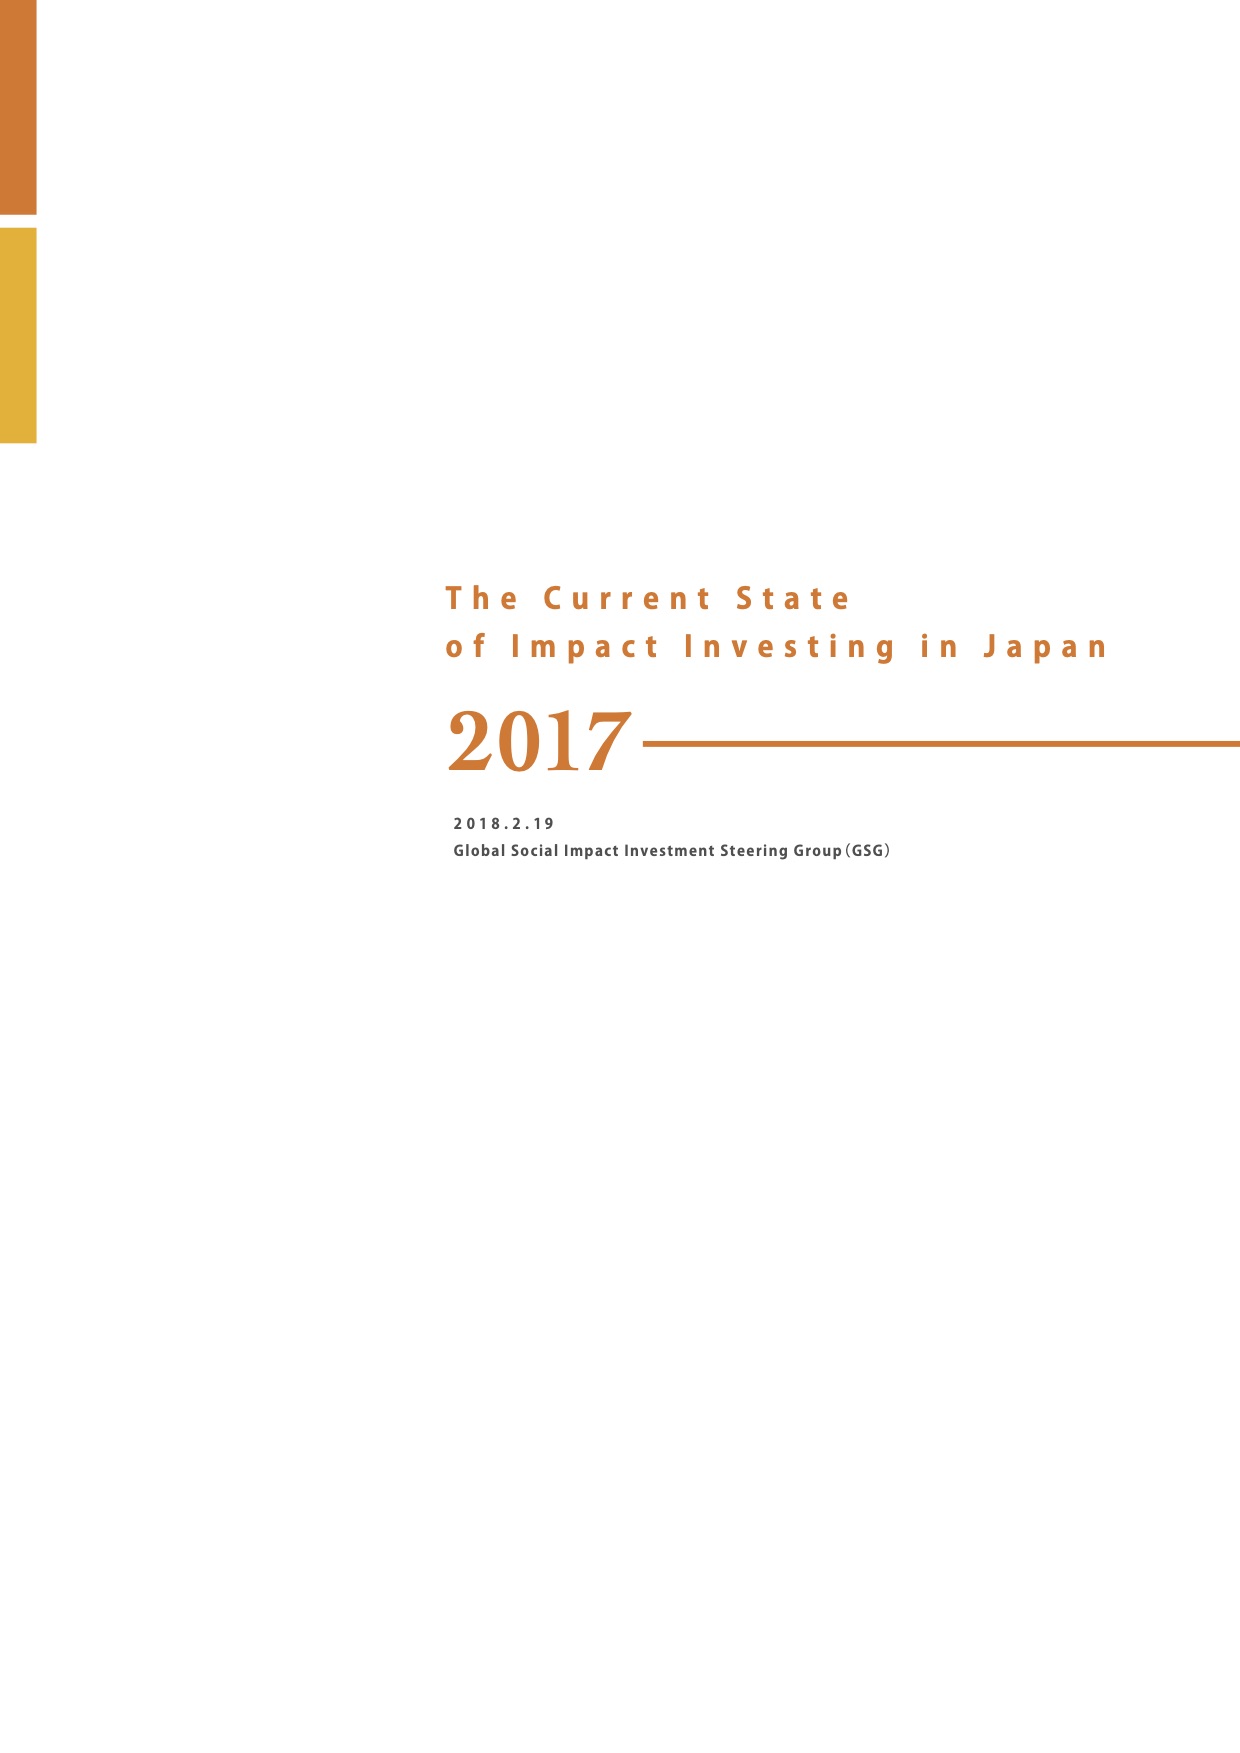 The Current State of Social Impact Investment in Japan 2017